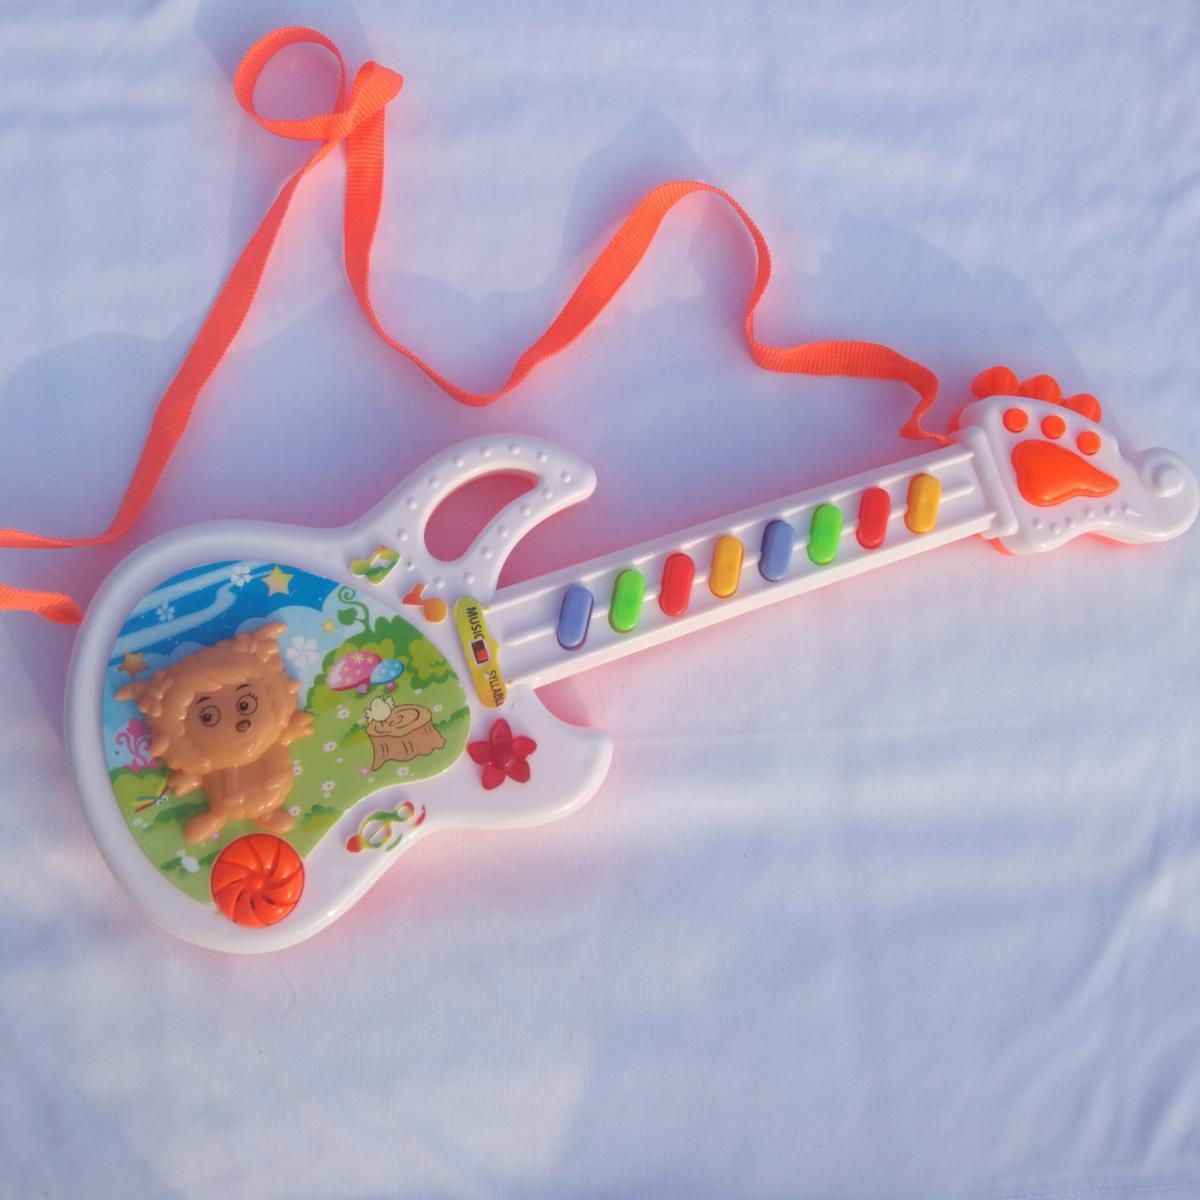 Guitar Toy Musical Play Kid Boy Girl Toddler Learning Electron Toy Big size 060520231226